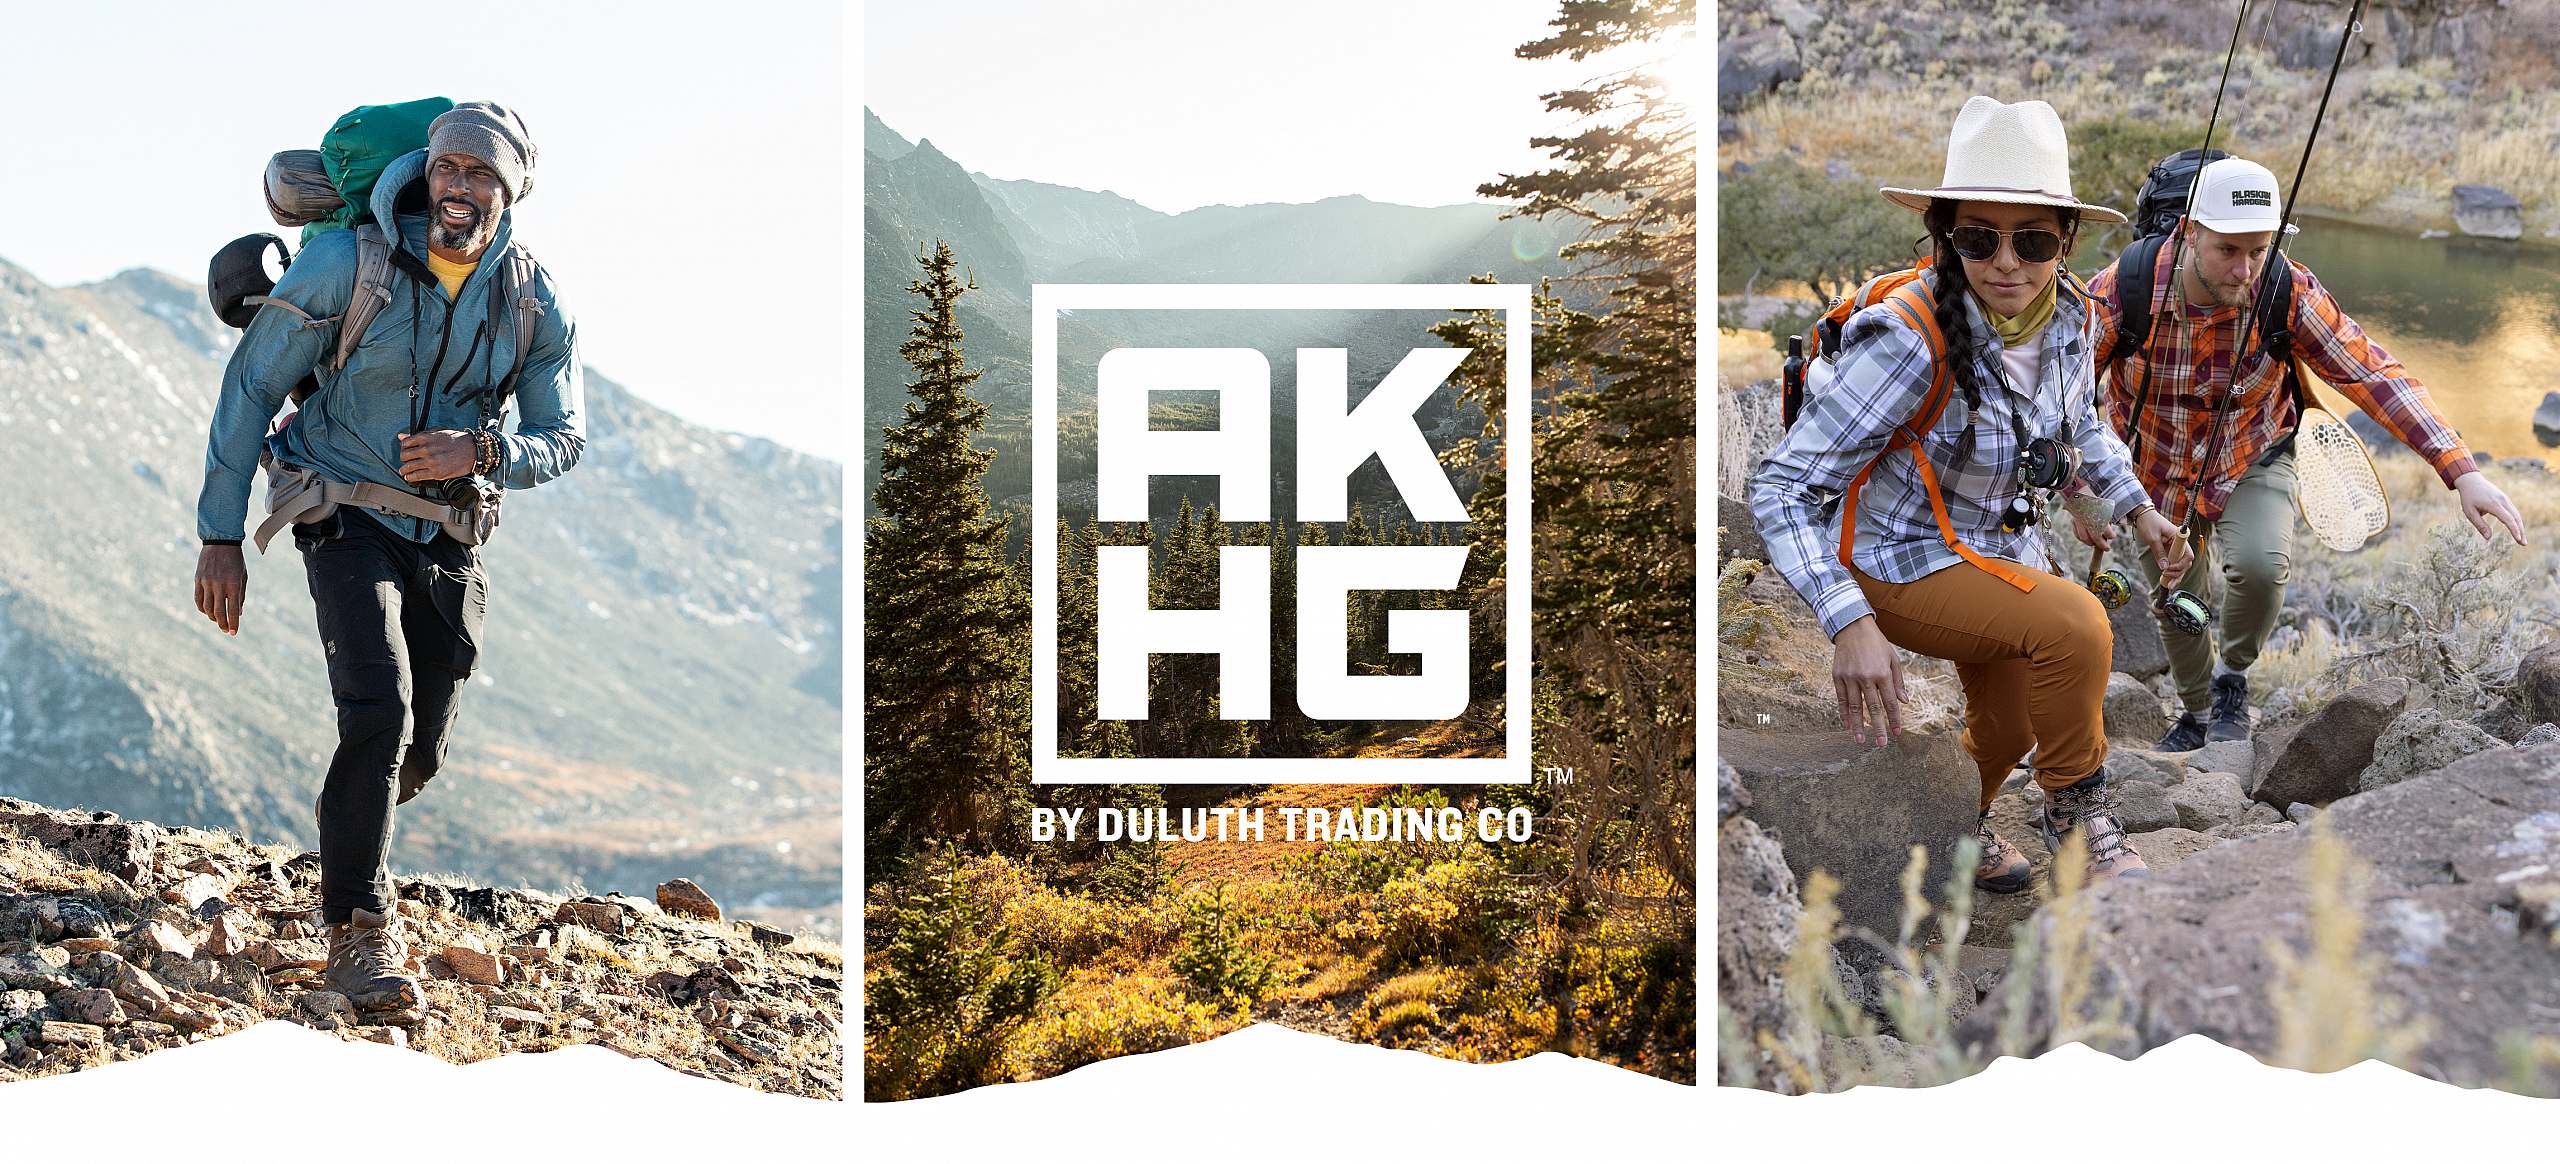 AKGH by Duluth Trading Co